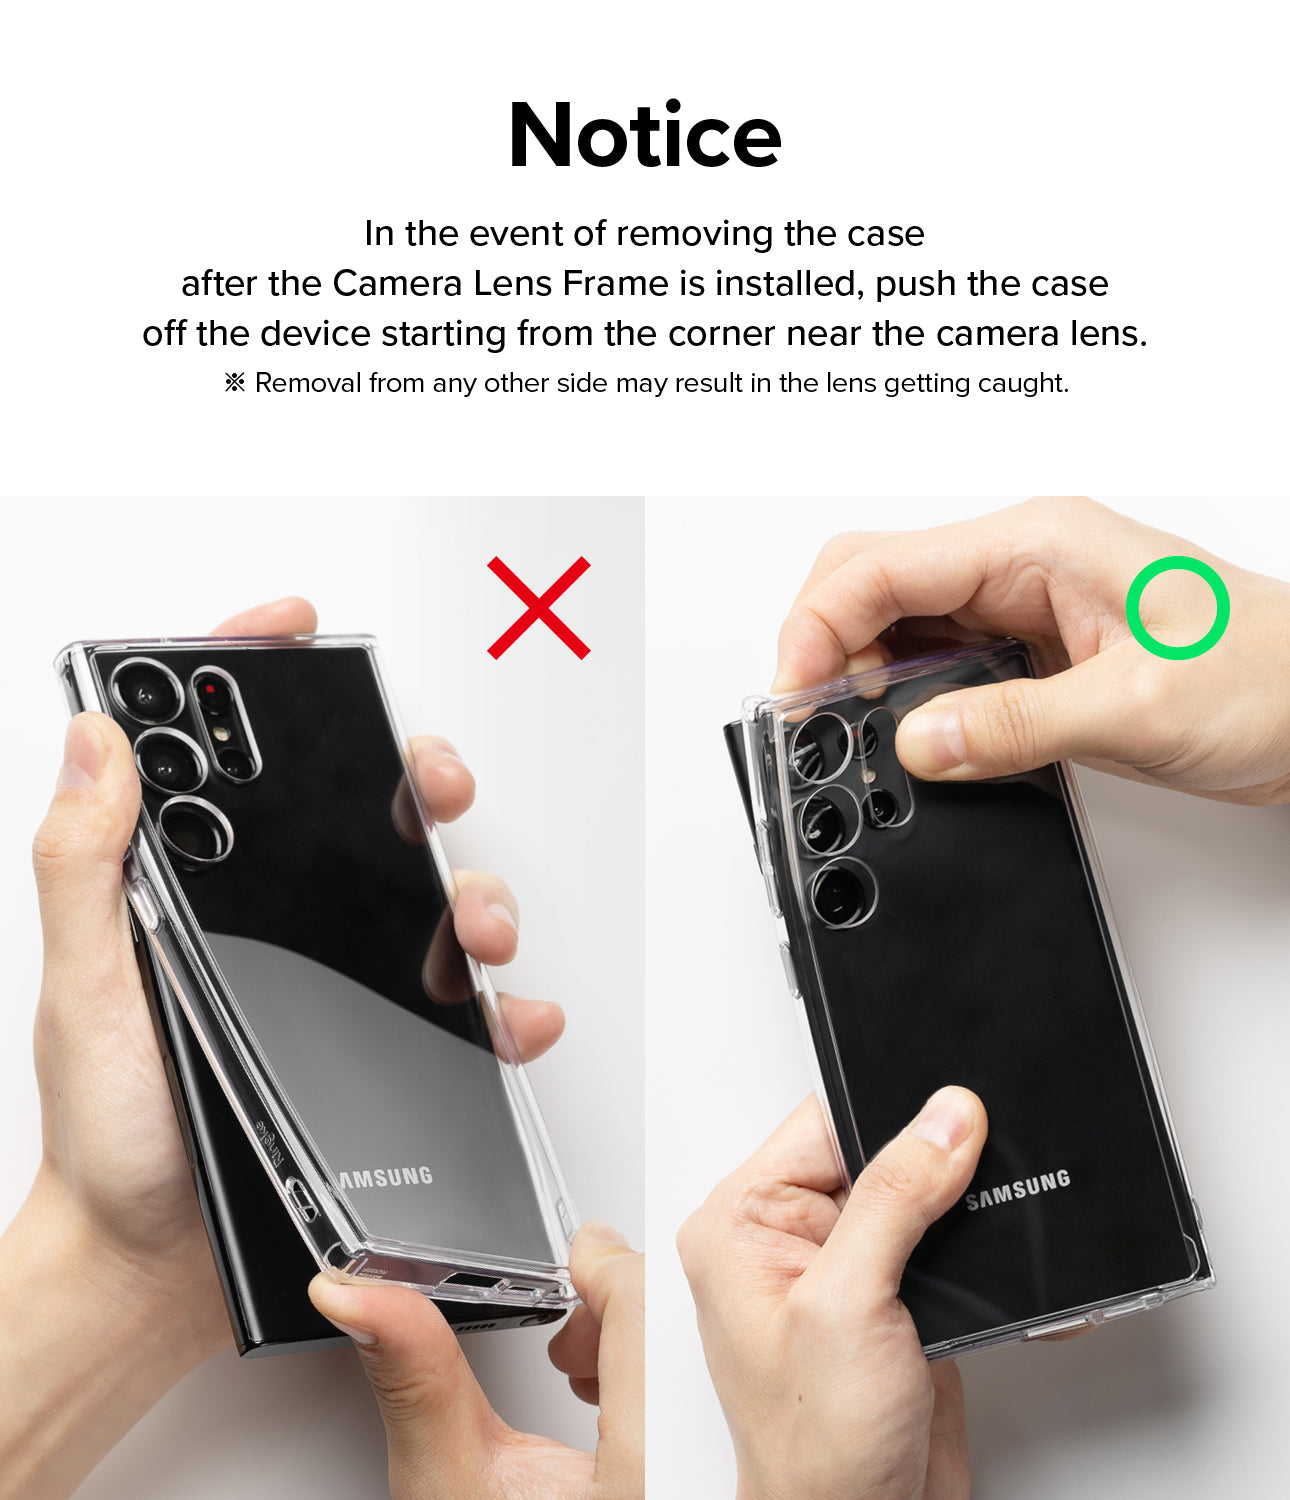 Notice l In the event of removing the case after the Camera Lens Frame is installed, push the case off the device starting from the corner near the camera lens. * Removal from any other side may result in the lens getting caught.